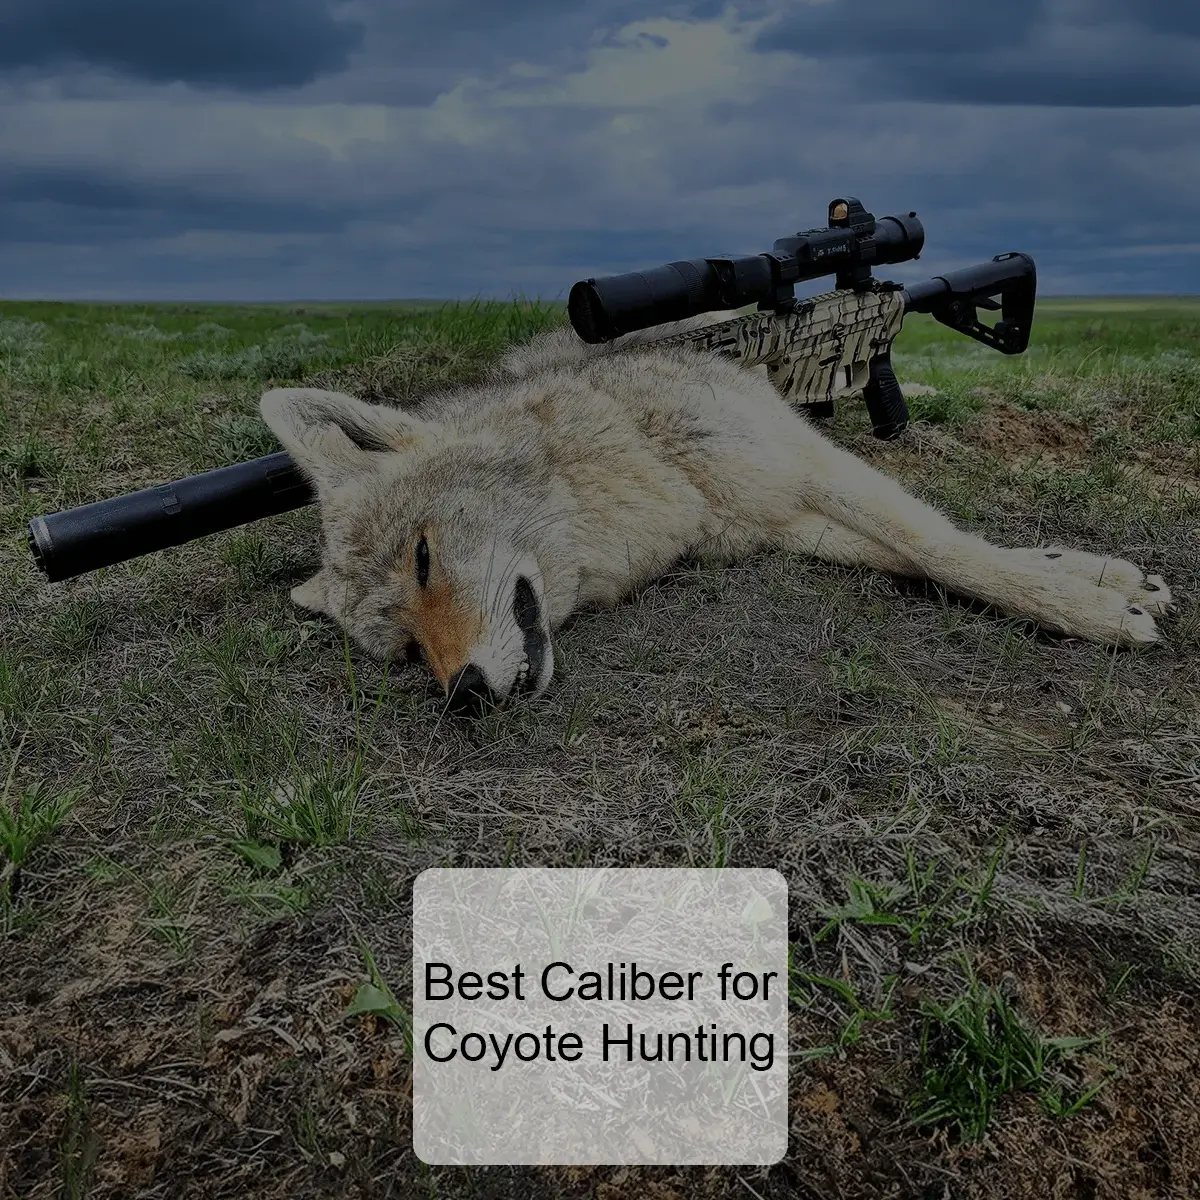 Best Caliber for Coyote Hunting